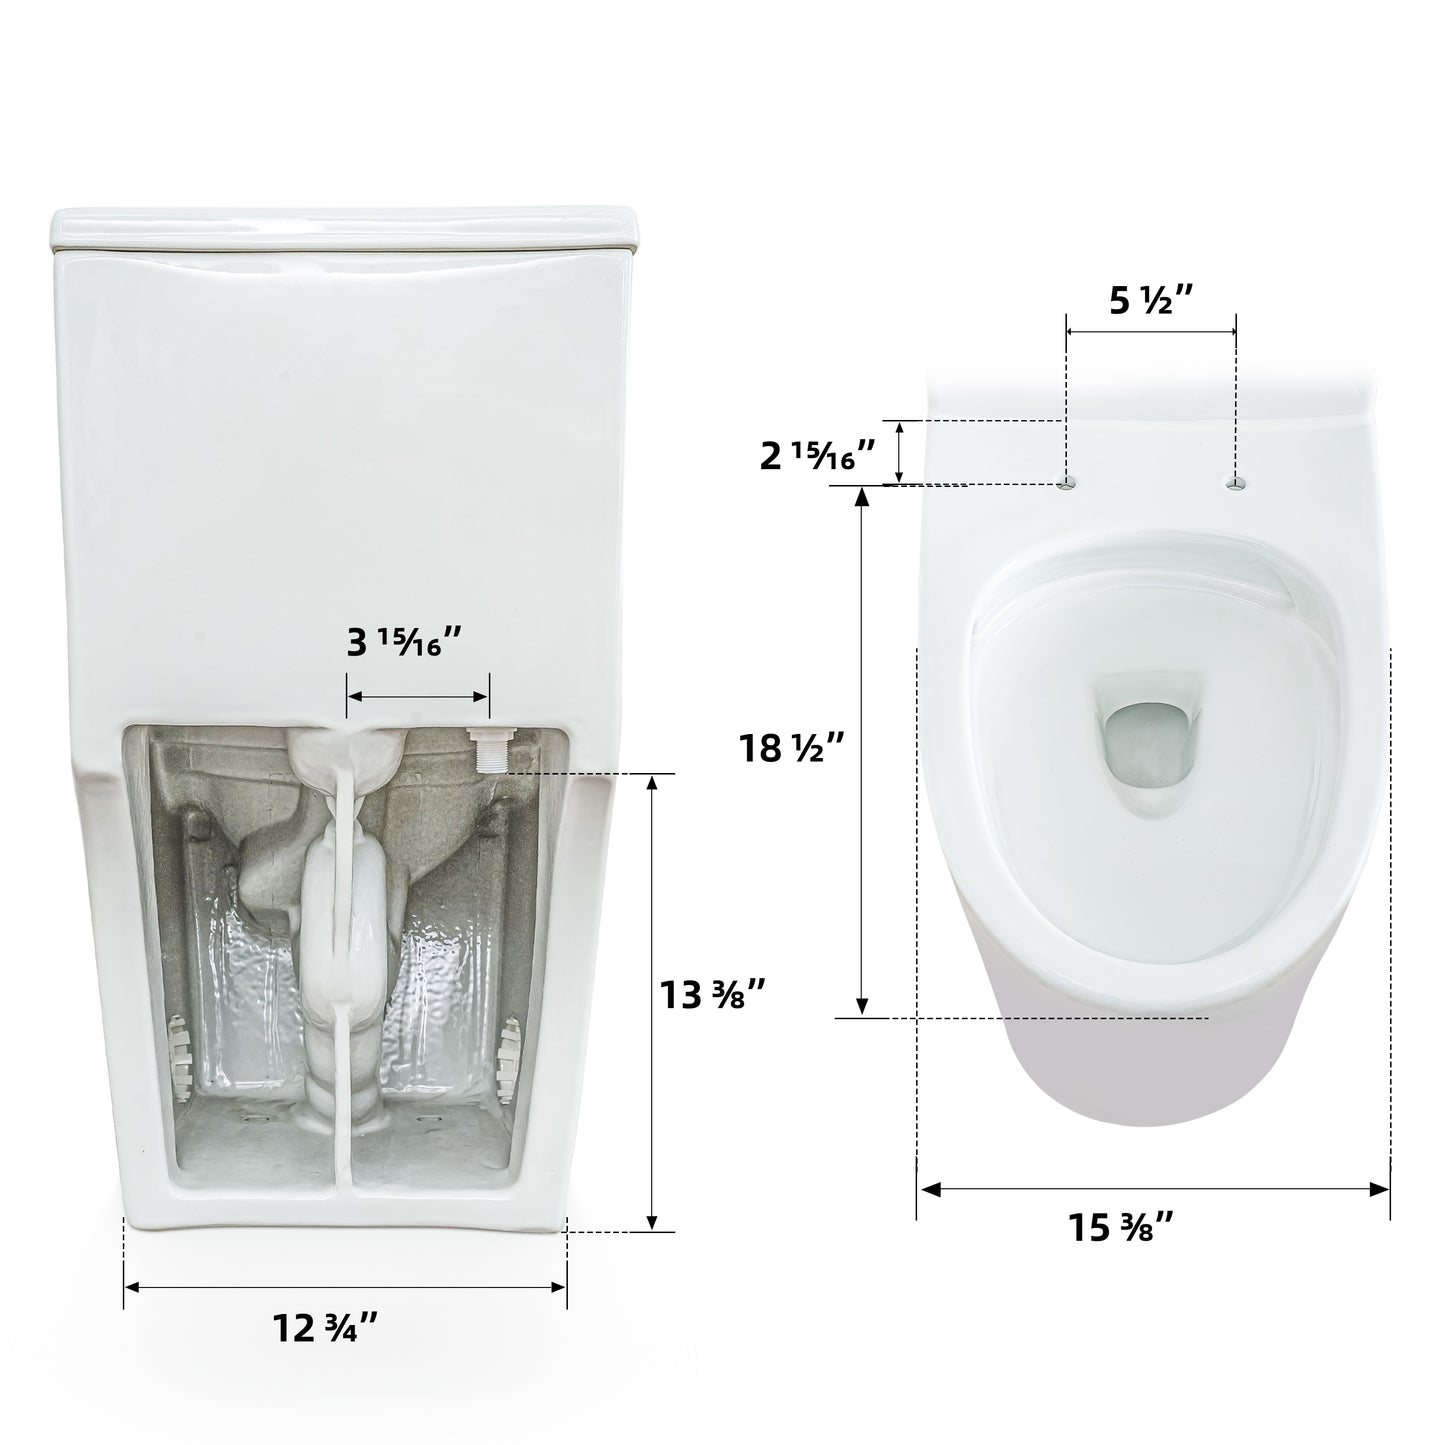 Casta Diva Elongated One-Piece Toilet Dual Flush Skirted Toilet with Soft Close Toilet Seat, White CD-T001